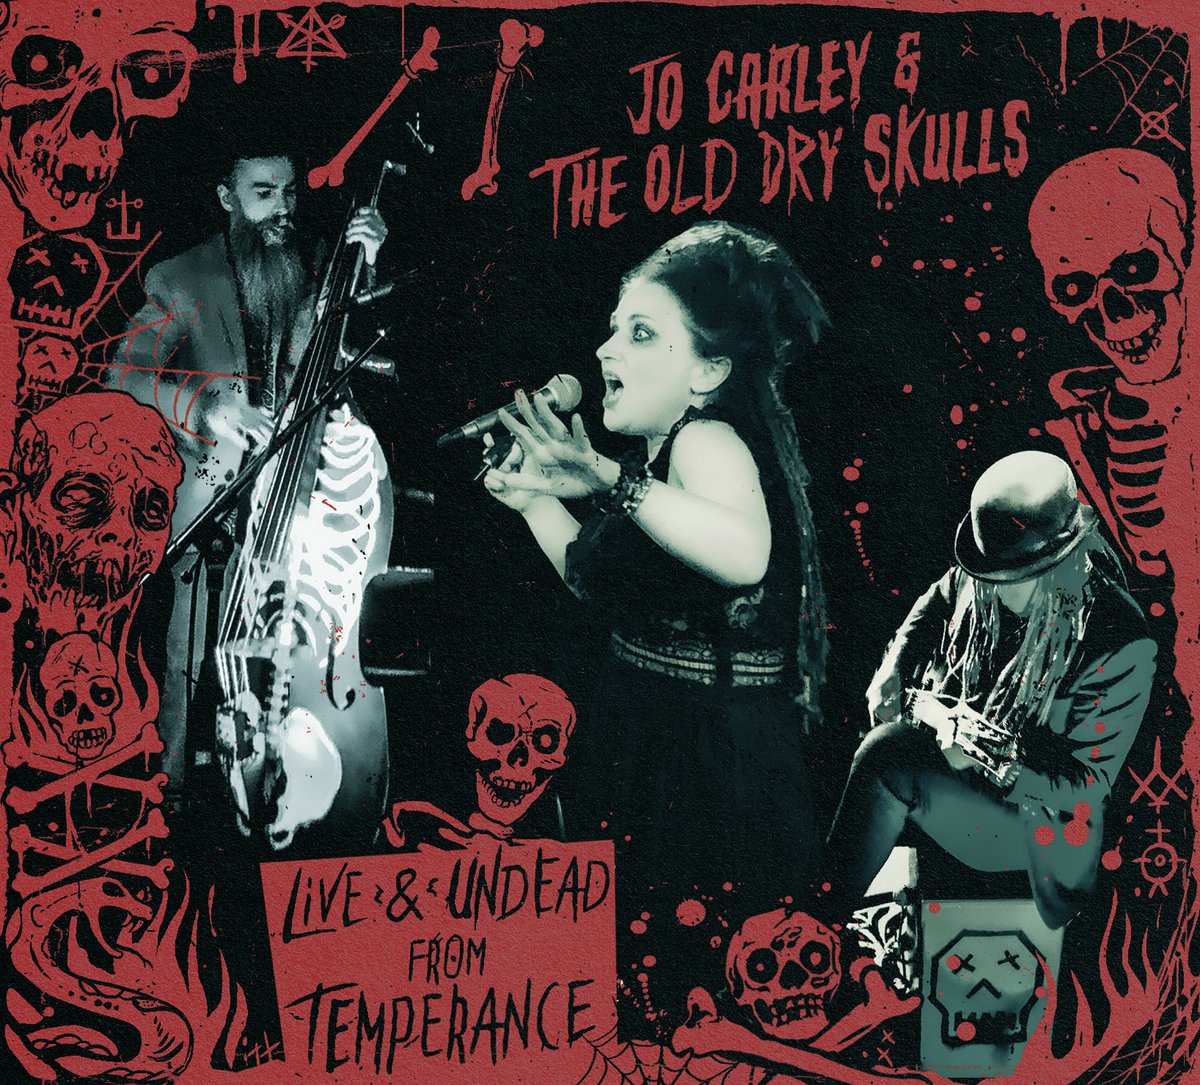 Jo Carley & The Old Dry Skulls - Live and Undead From Temperance